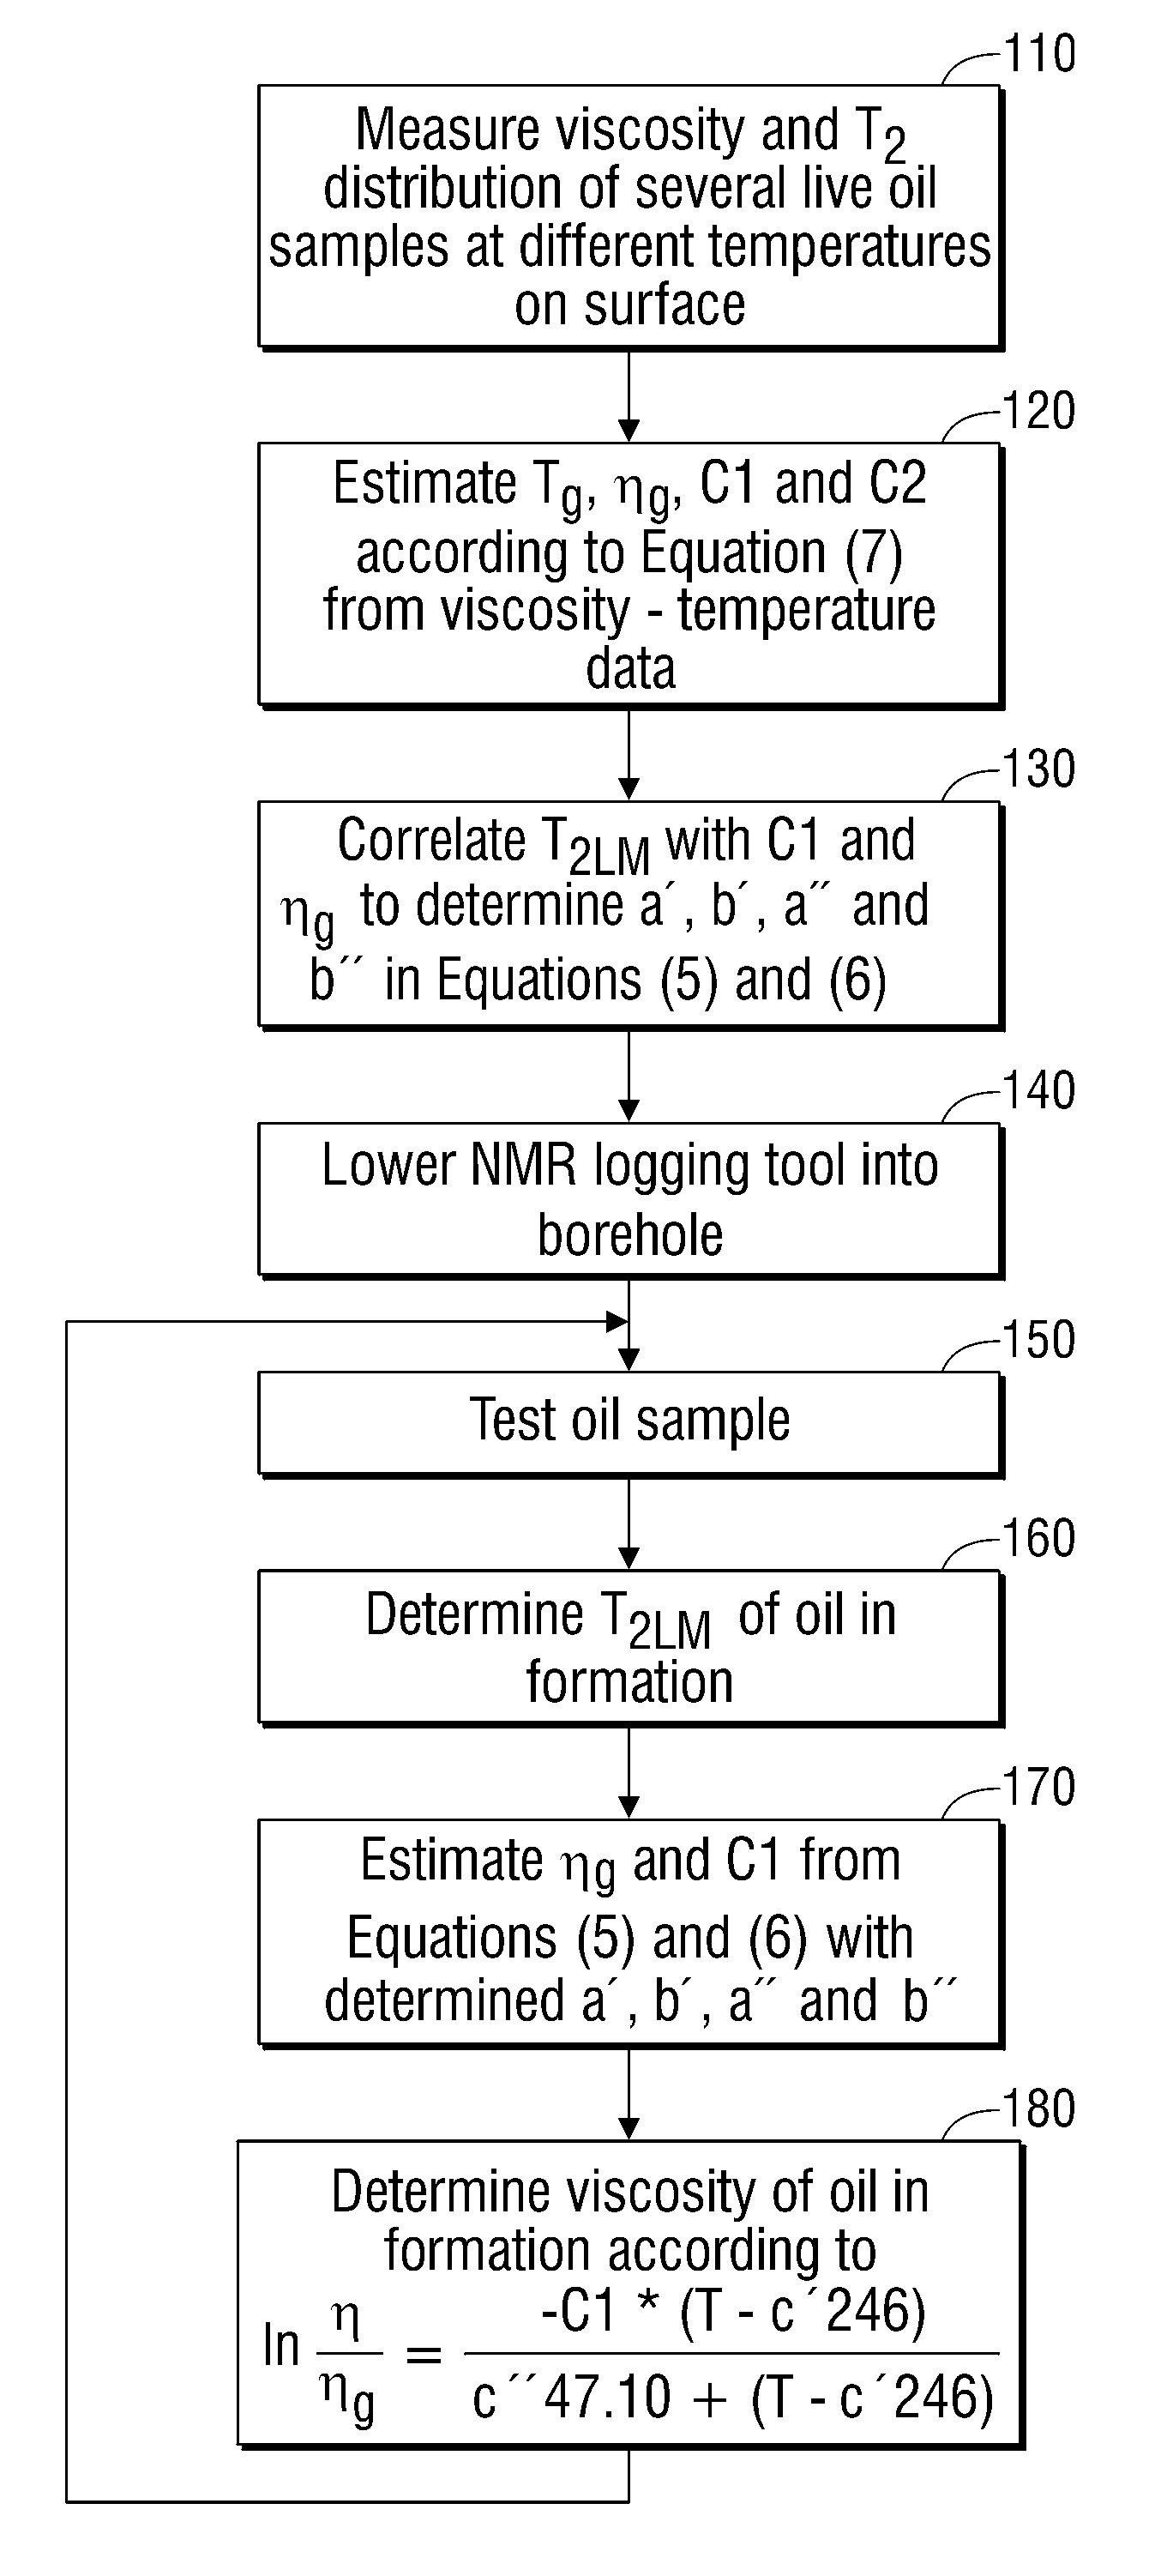 Methods for determining in situ the viscosity of heavy oil using nuclear magnetic resonance relaxation time measurements